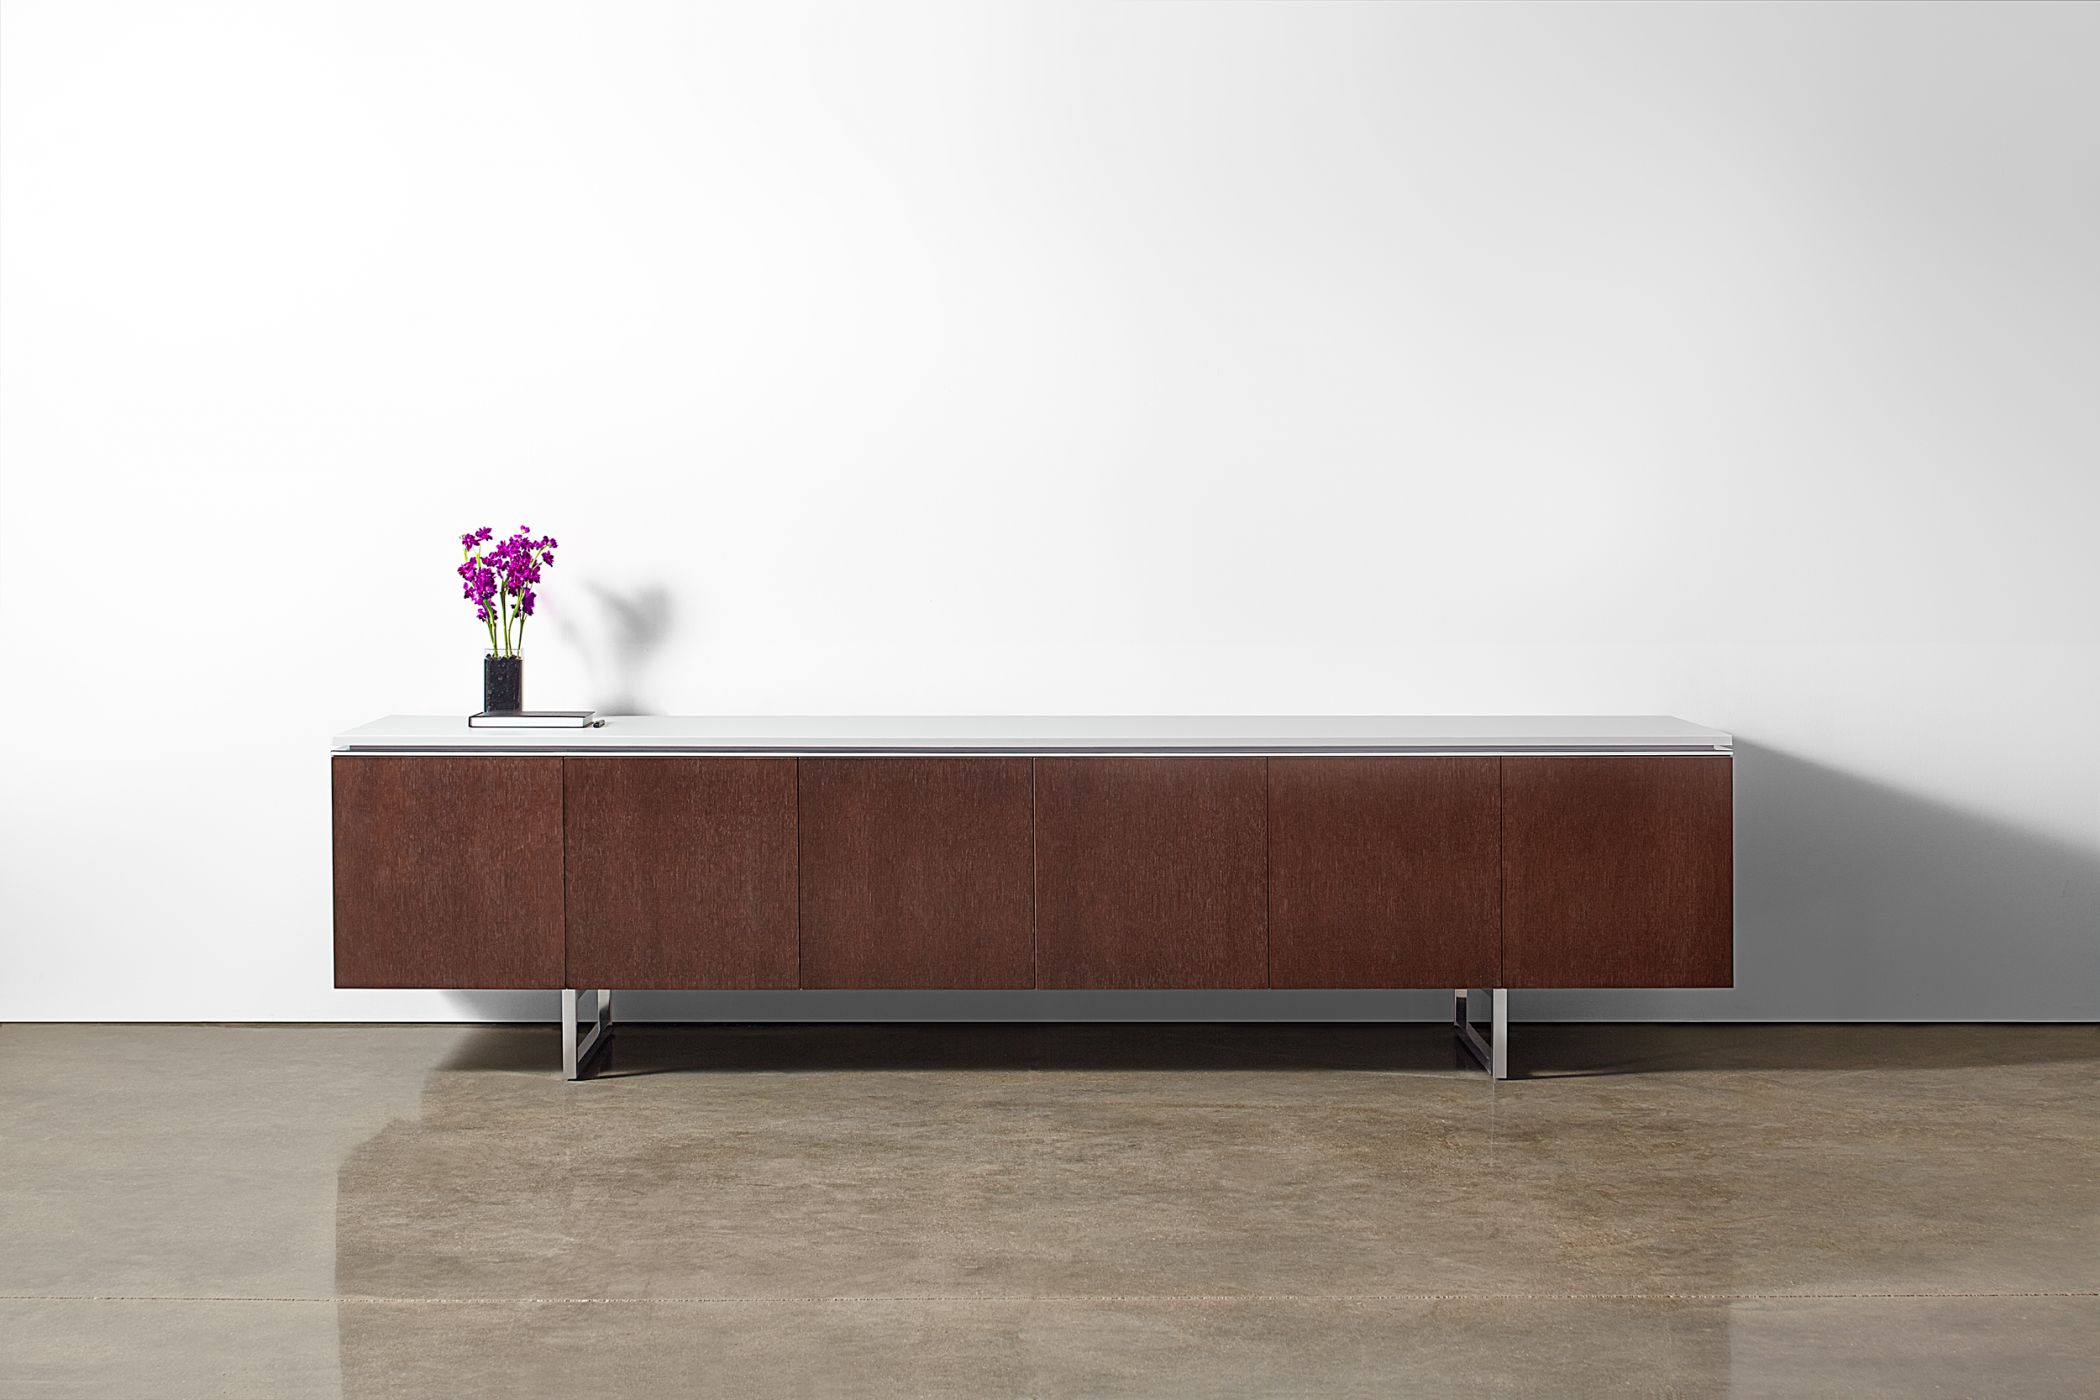 Mesa's Signature Credenza can be specified in a full range of materials, finishes, and sizes.